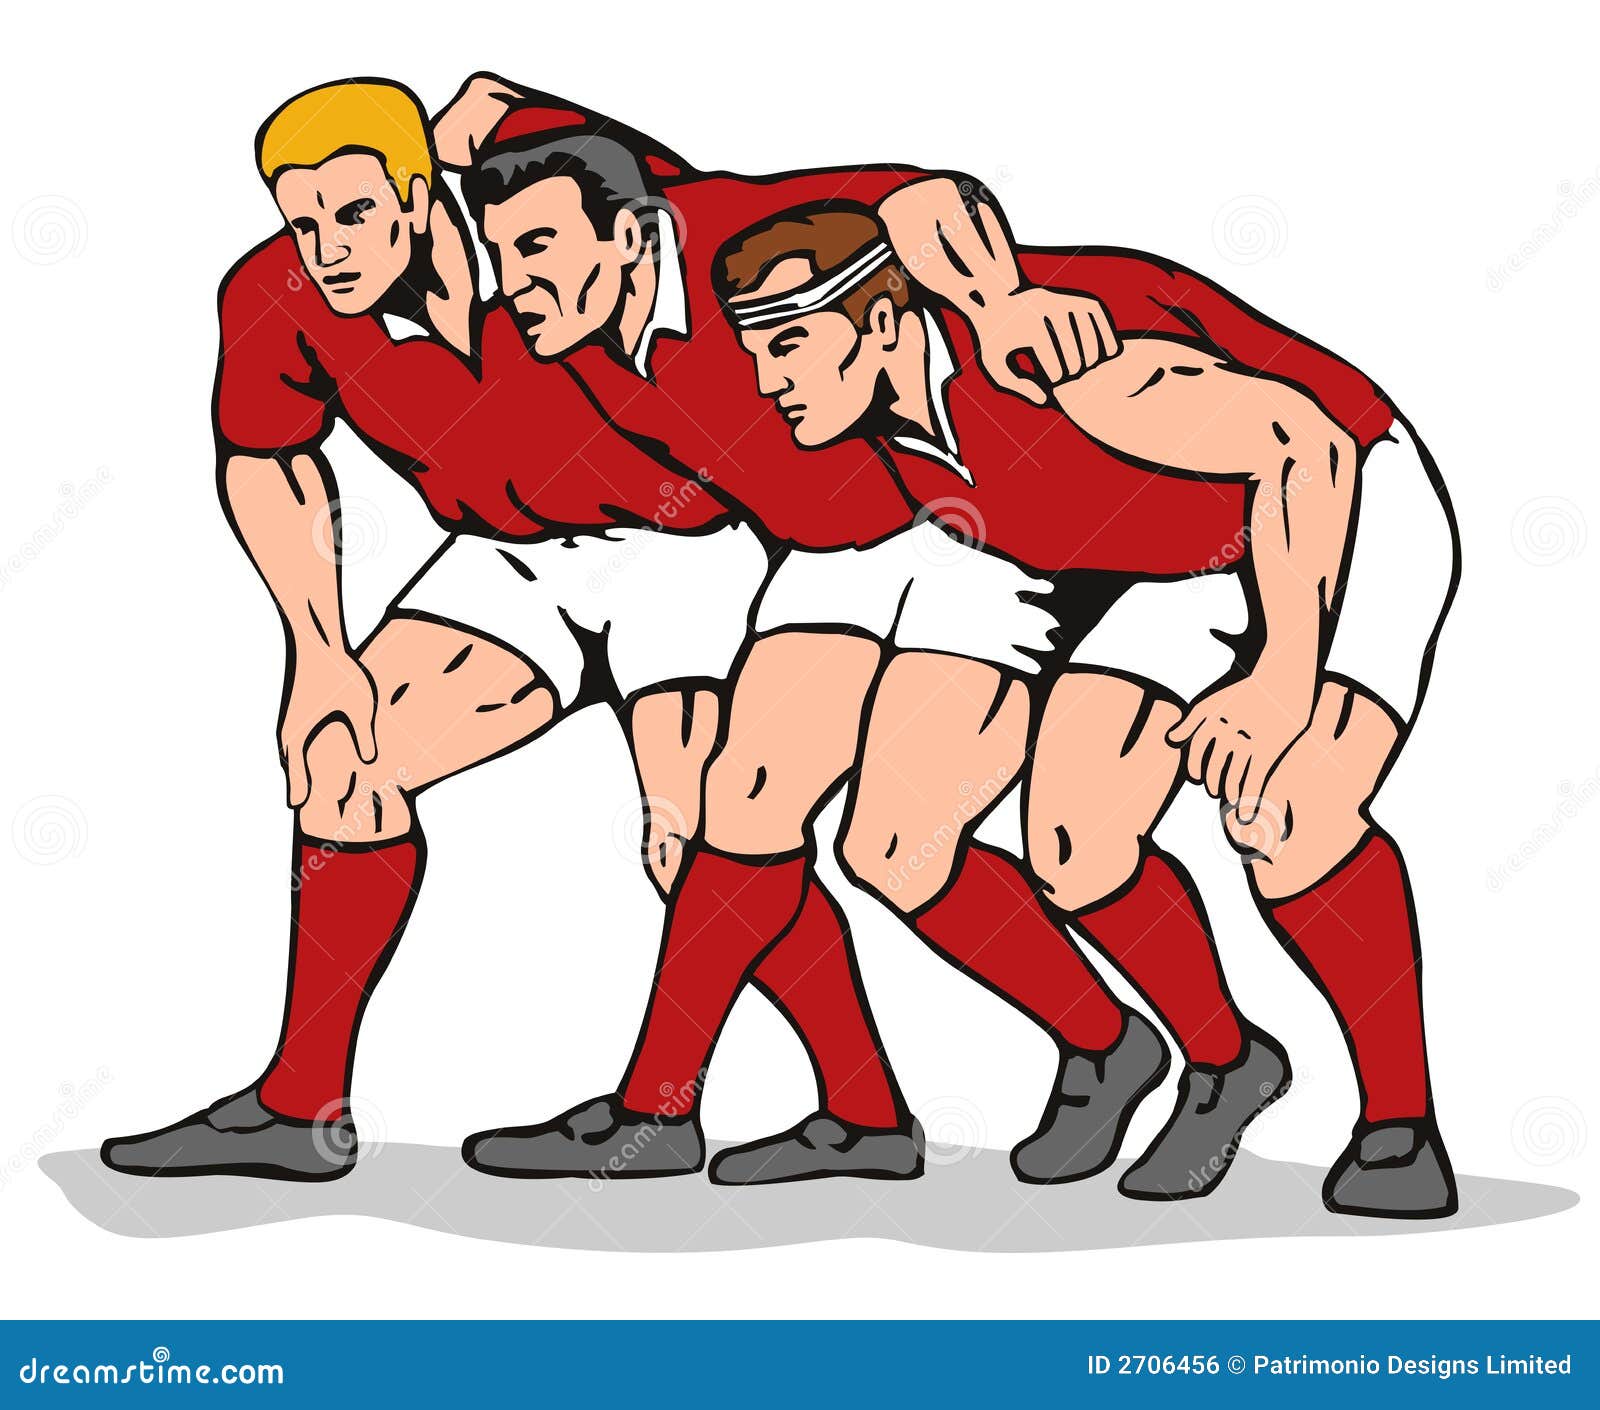 clipart rugby - photo #32